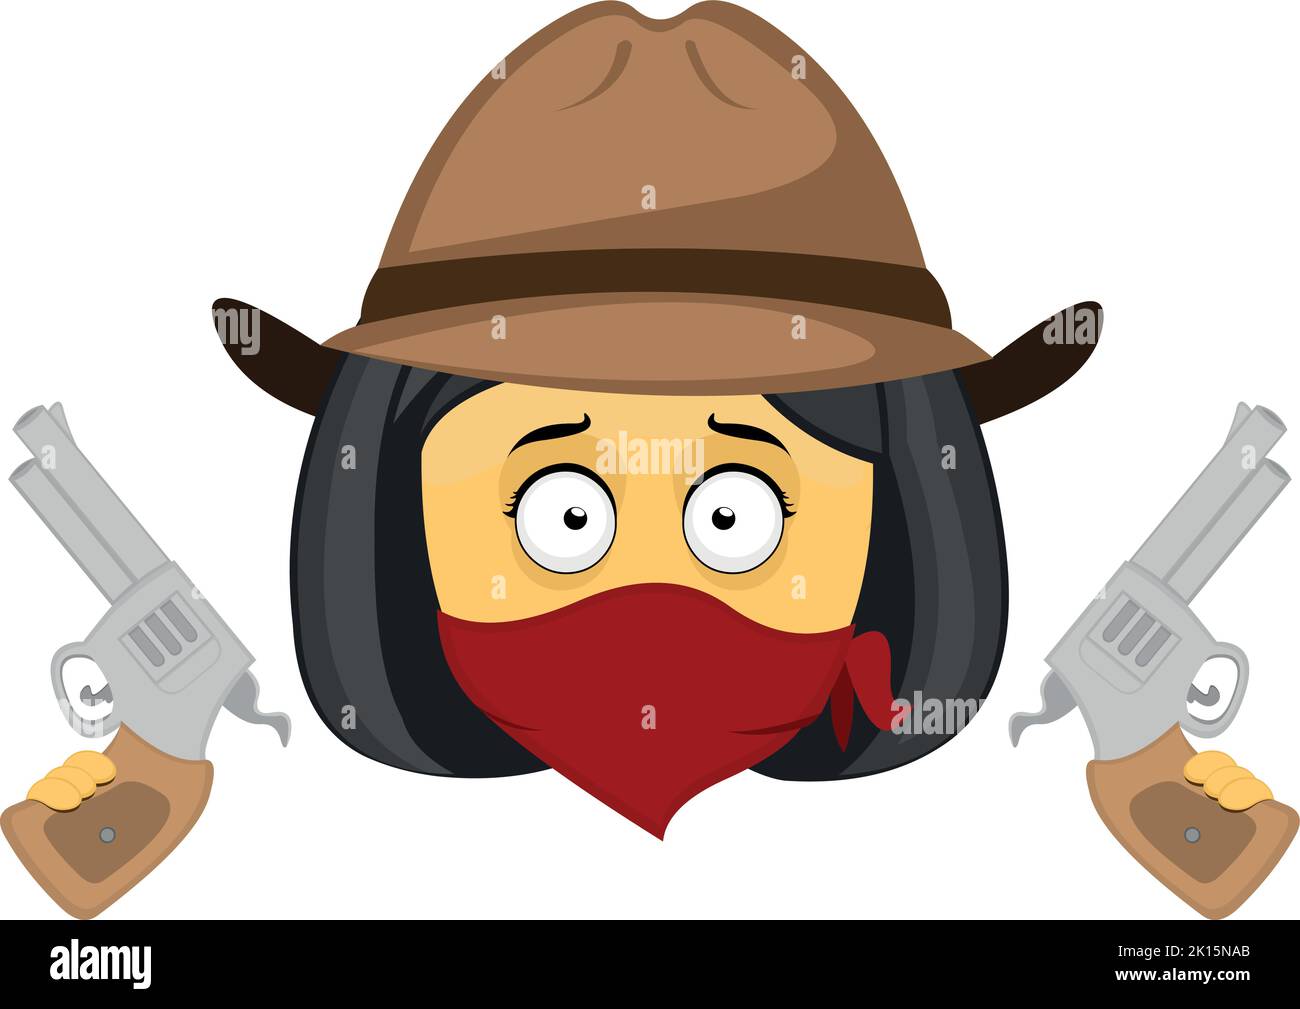 Vector emoji illustration of a cartoon cowboy bandit woman, with a hat, bandana covering her face and guns in her hands Stock Vector